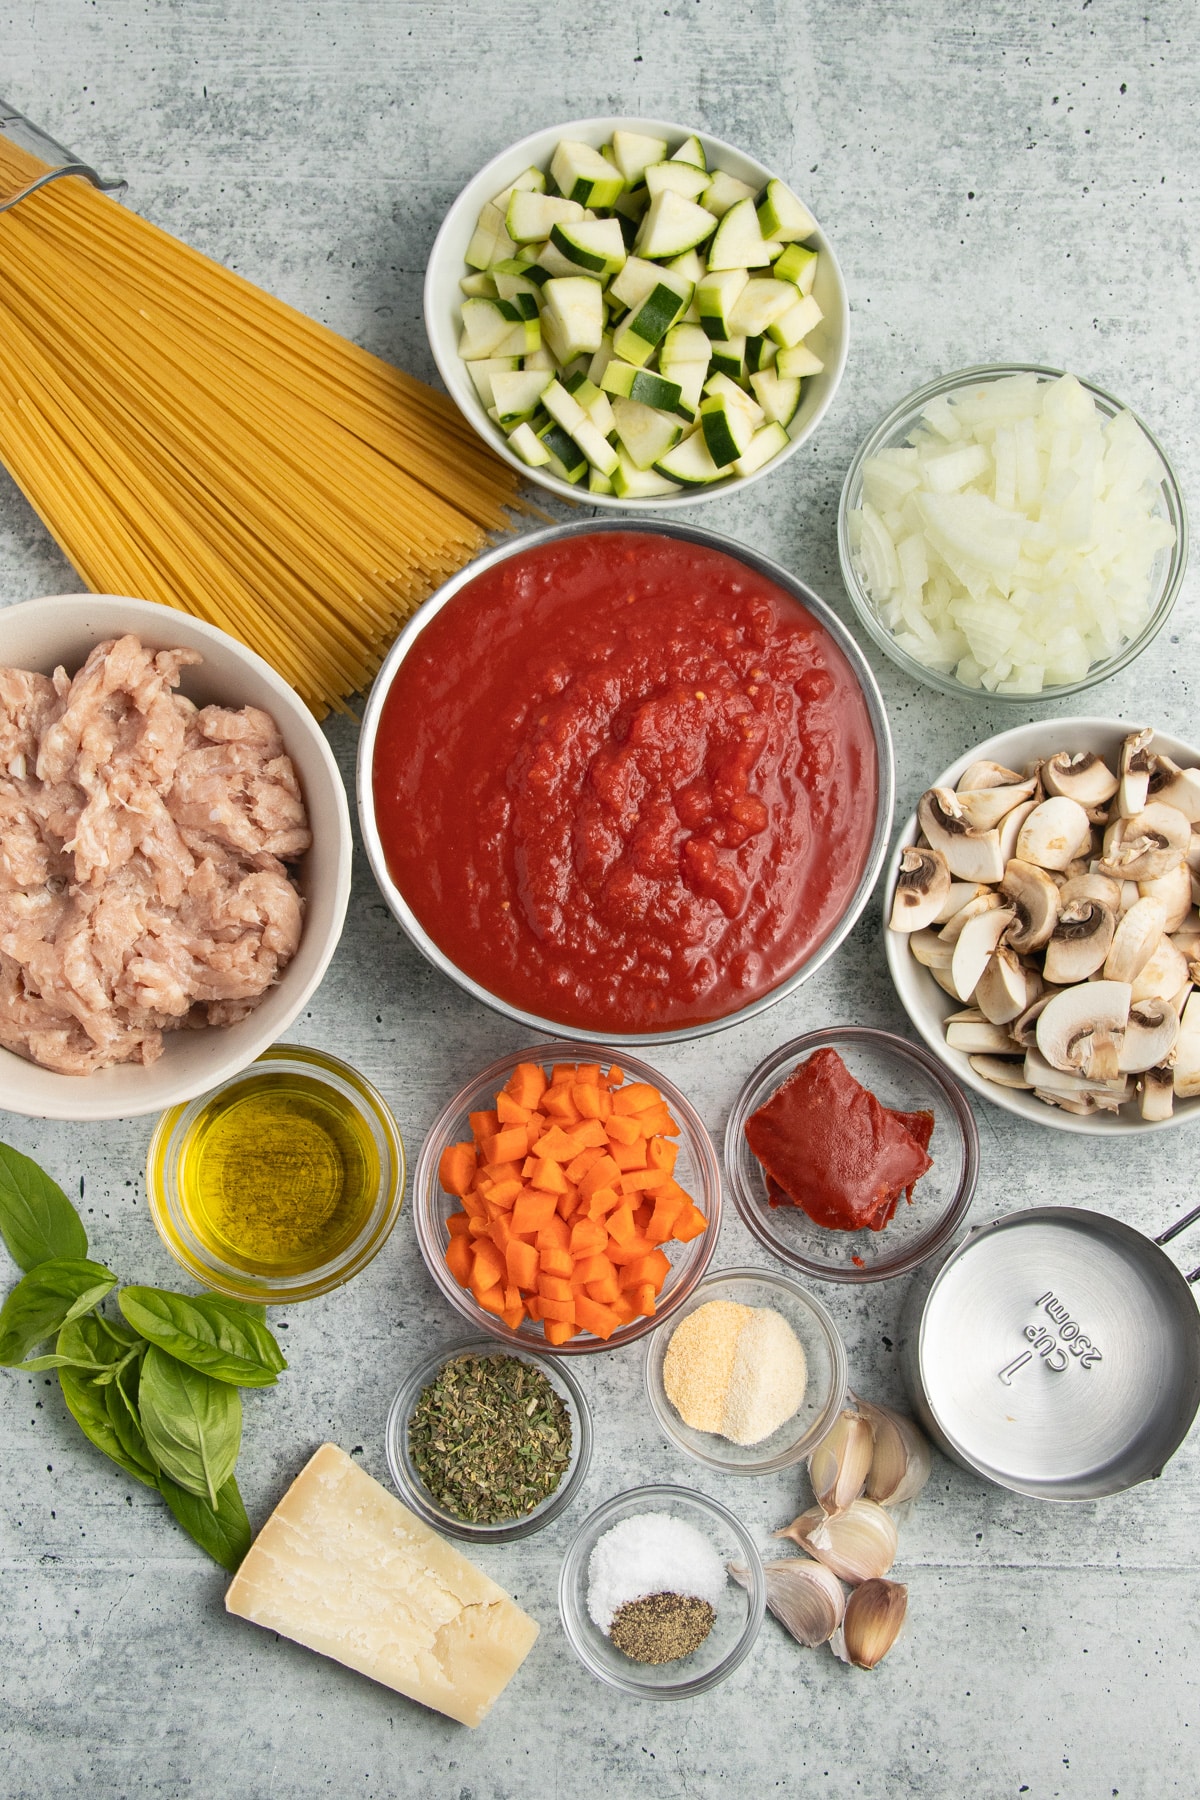 This is a picture of all the ingredients used to make this recipe.